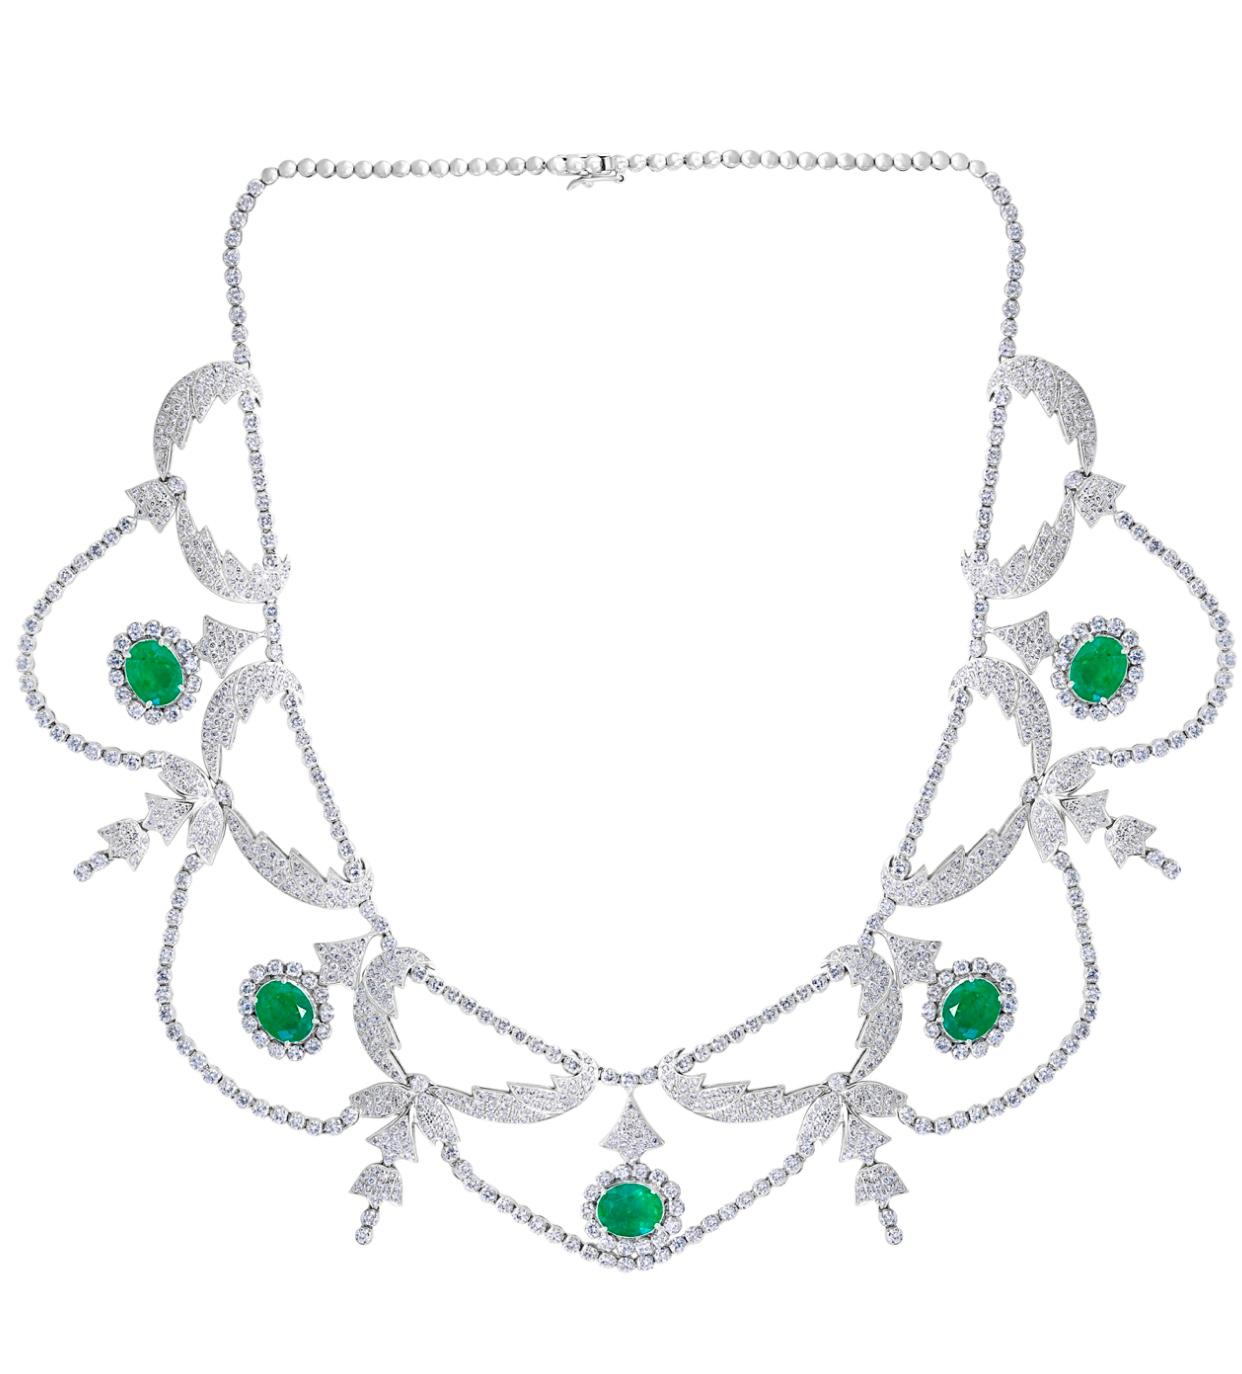 Oval Natural Zambian Emerald & Diamond Fringe Necklace and Earring Bridal Suite For Sale 4